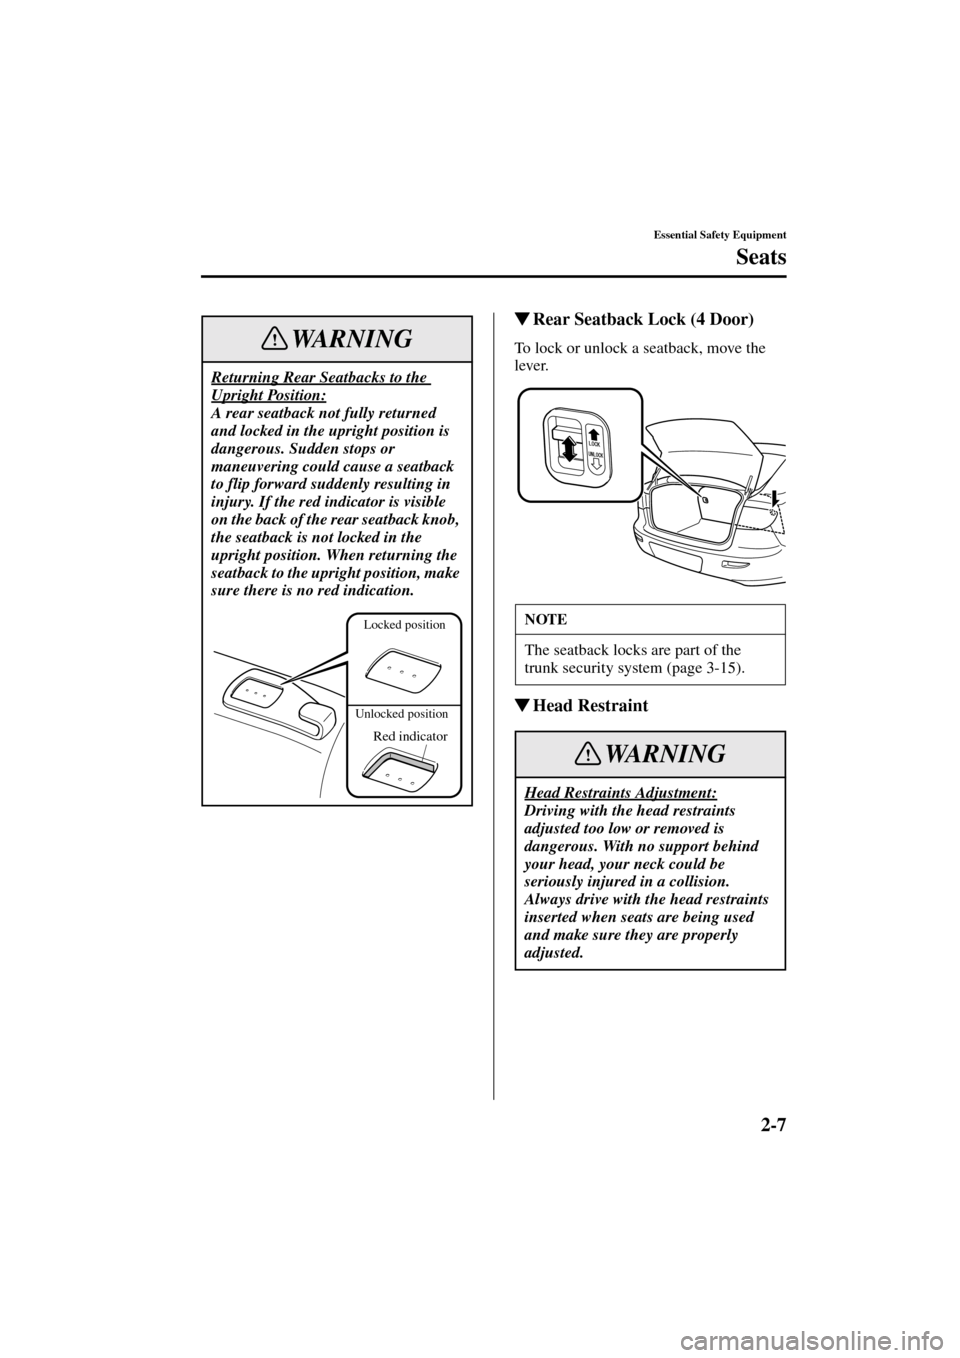 MAZDA MODEL 3 HATCHBACK 2004   (in English) User Guide 2-7
Essential Safety Equipment
Seats
Form No. 8S18-EA-03I
Rear Seatback Lock (4 Door)
To lock or unlock a seatback, move the 
lever.
Head Restraint
Returning Rear Seatbacks to the 
Upright Position: